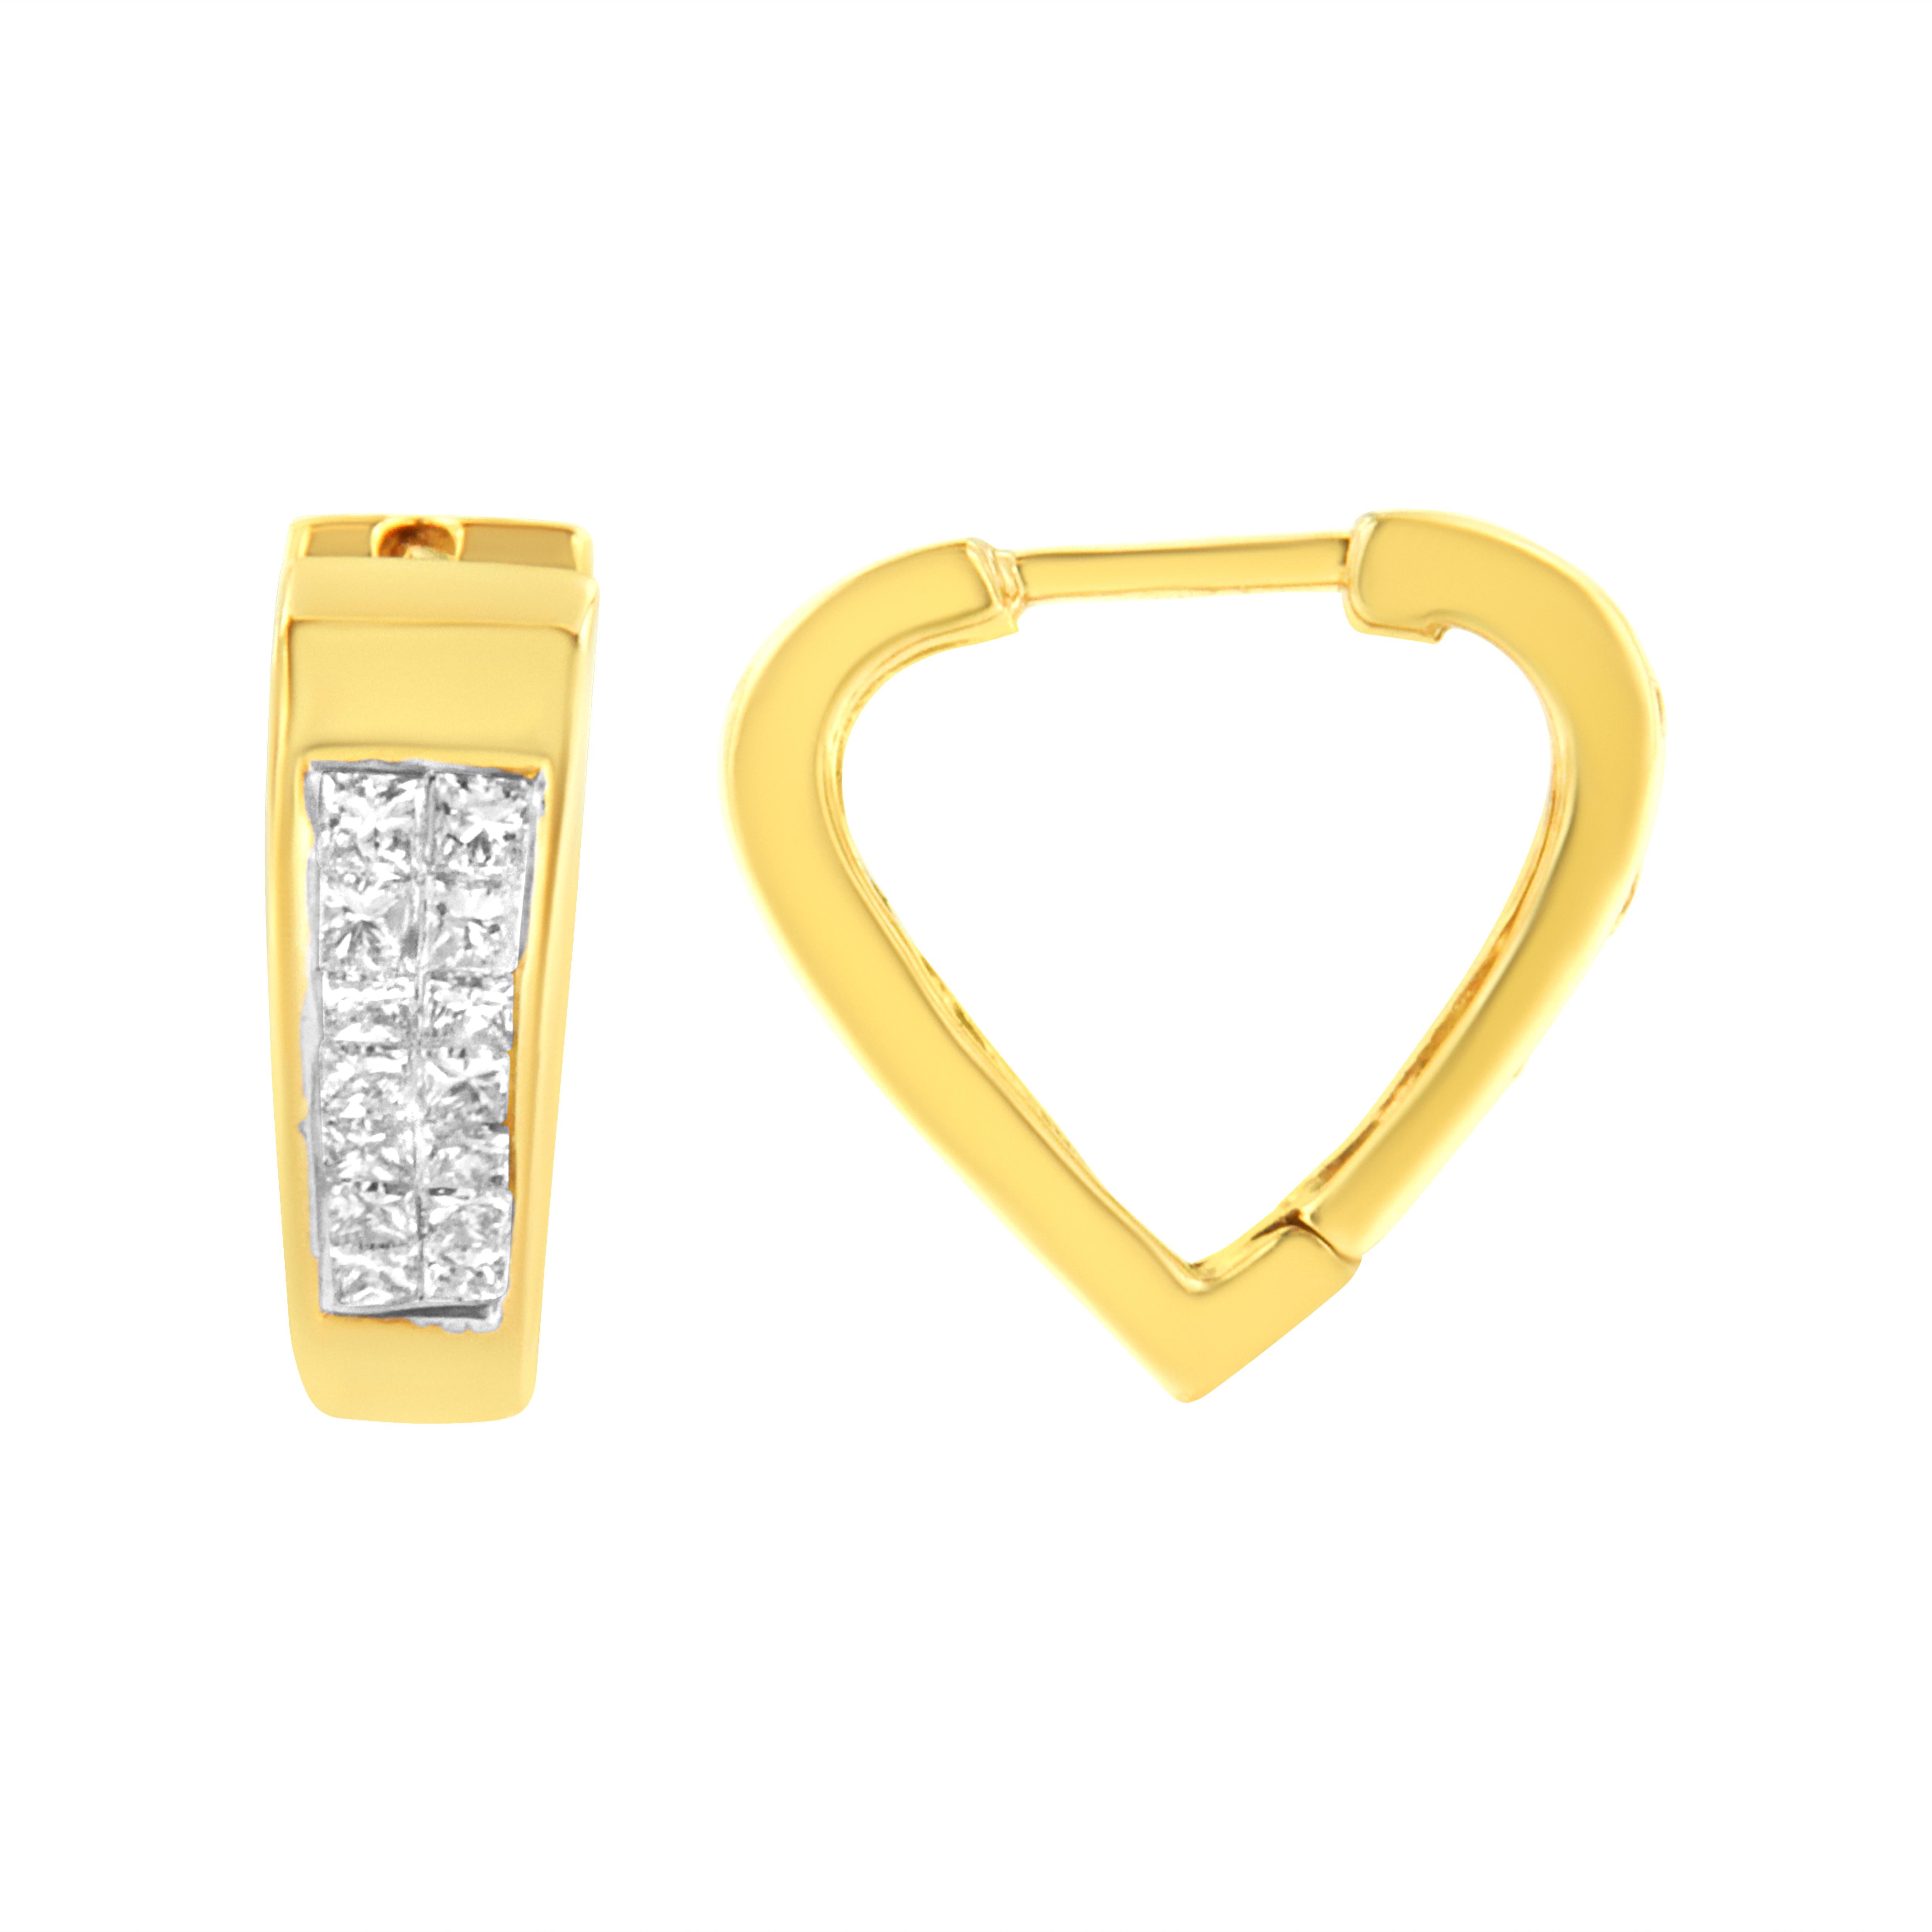 These petite and trendy diamond huggy earrings are the perfect gift for any loved one. Created in 14k yellow gold, this beautiful piece has heart-shaped designs etched into it's base. With a total diamond weight of 1/2 ct., these hoops showcase